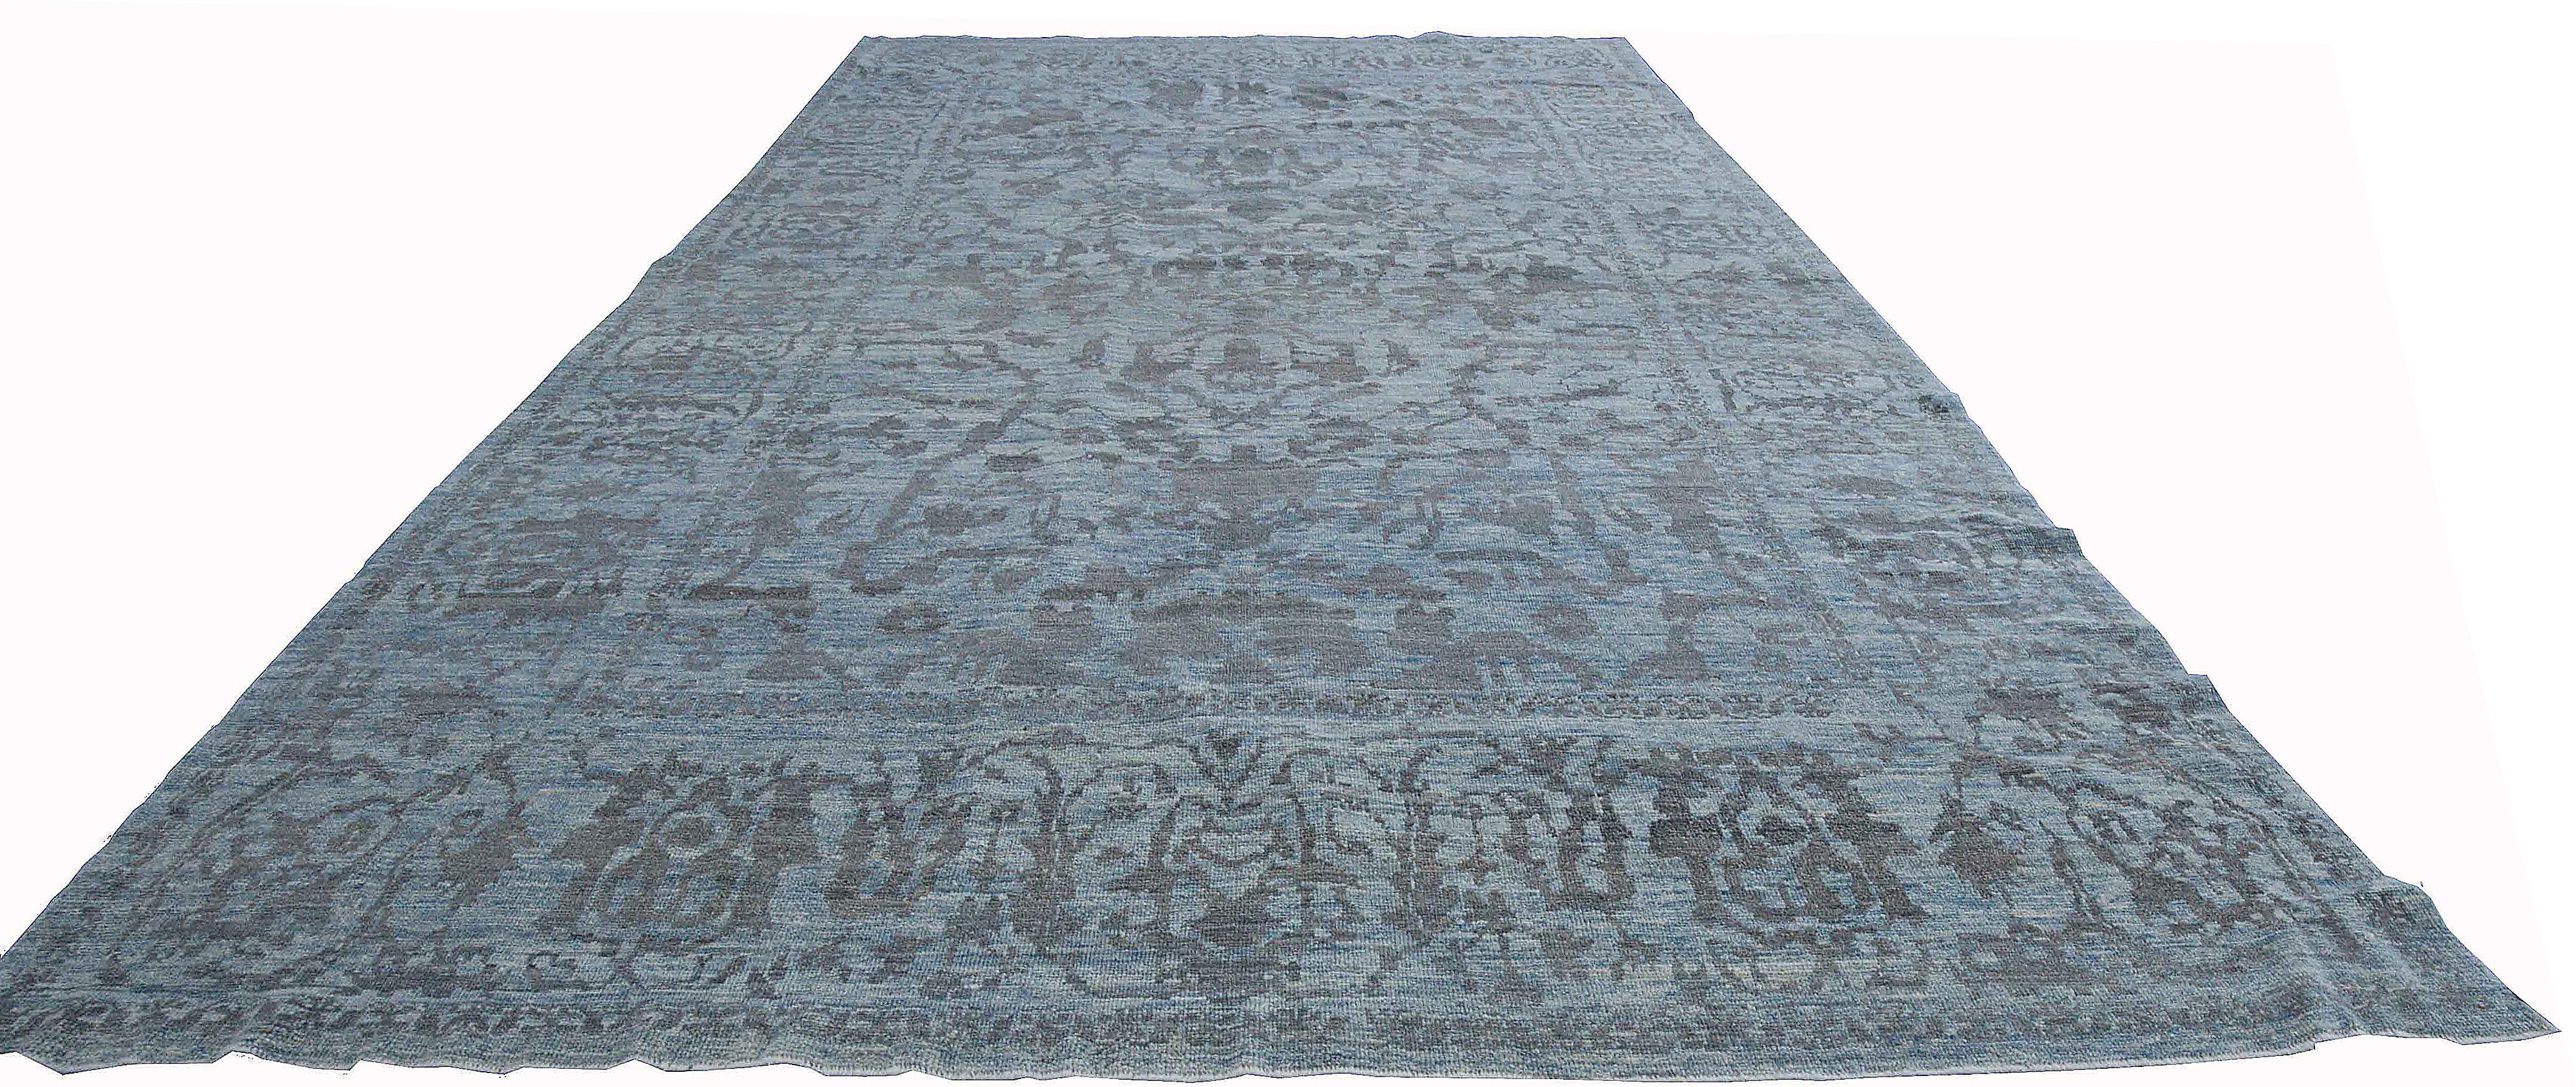 Modern Turkish rug made of handwoven sheep’s wool of the finest quality. It’s colored with organic vegetable dyes that are certified safe for humans and pets alike. It features a lovely blue field with floral details in gray commonly identified with